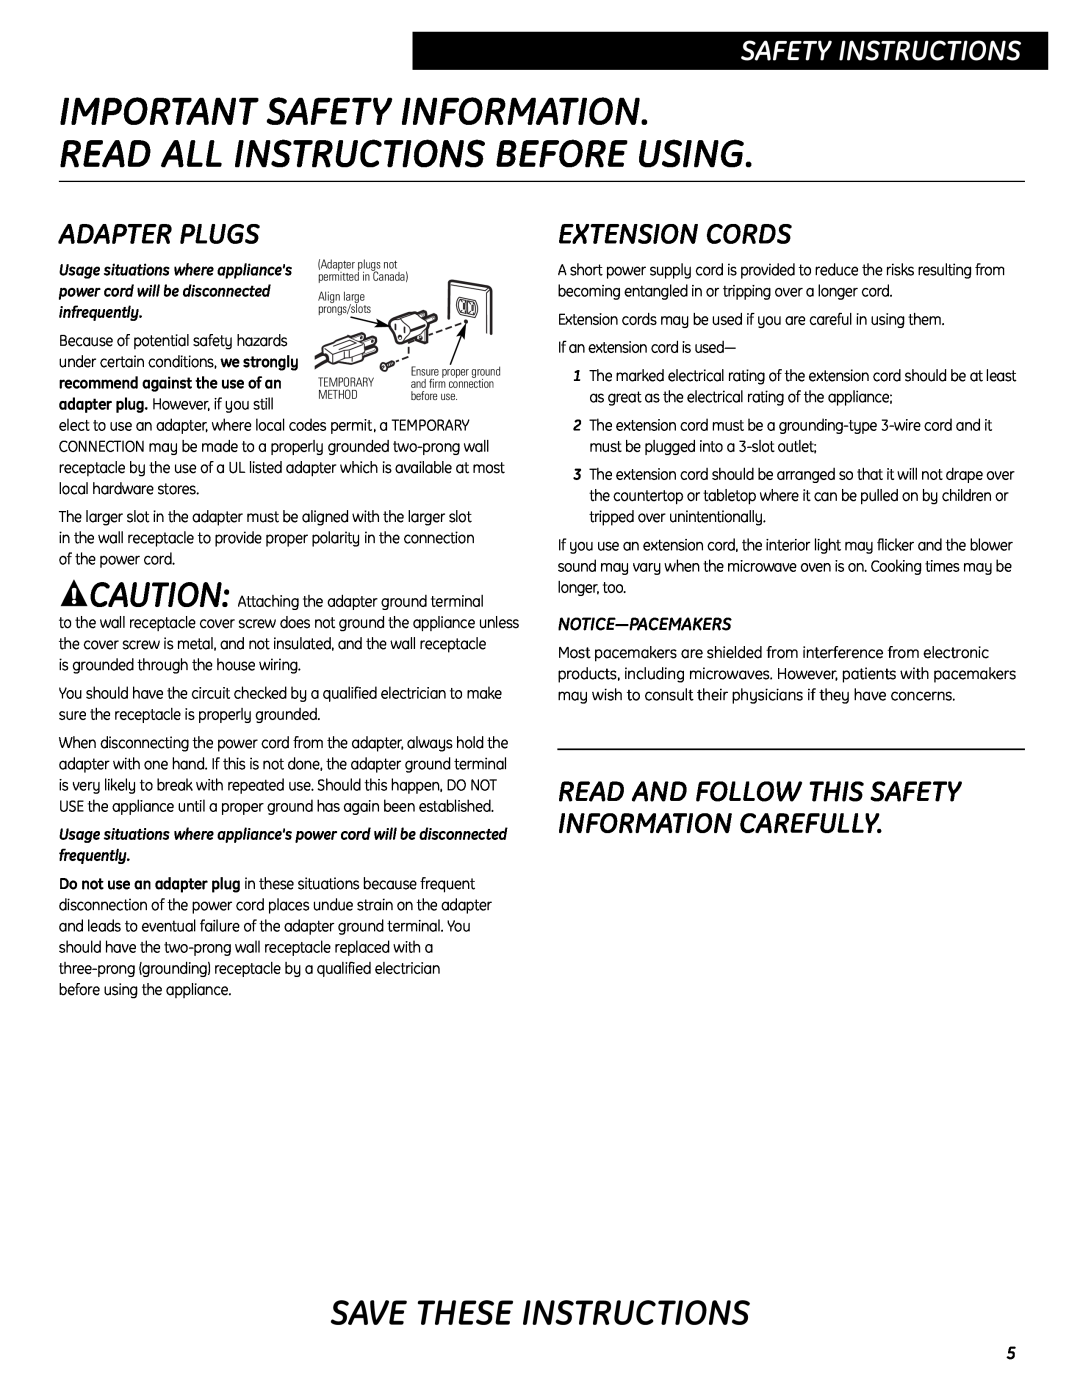 GE SESO732 quick start Adapter Plugs, Extension Cords, Notice-Pacemakers, Save These Instructions, Safety Instructions 